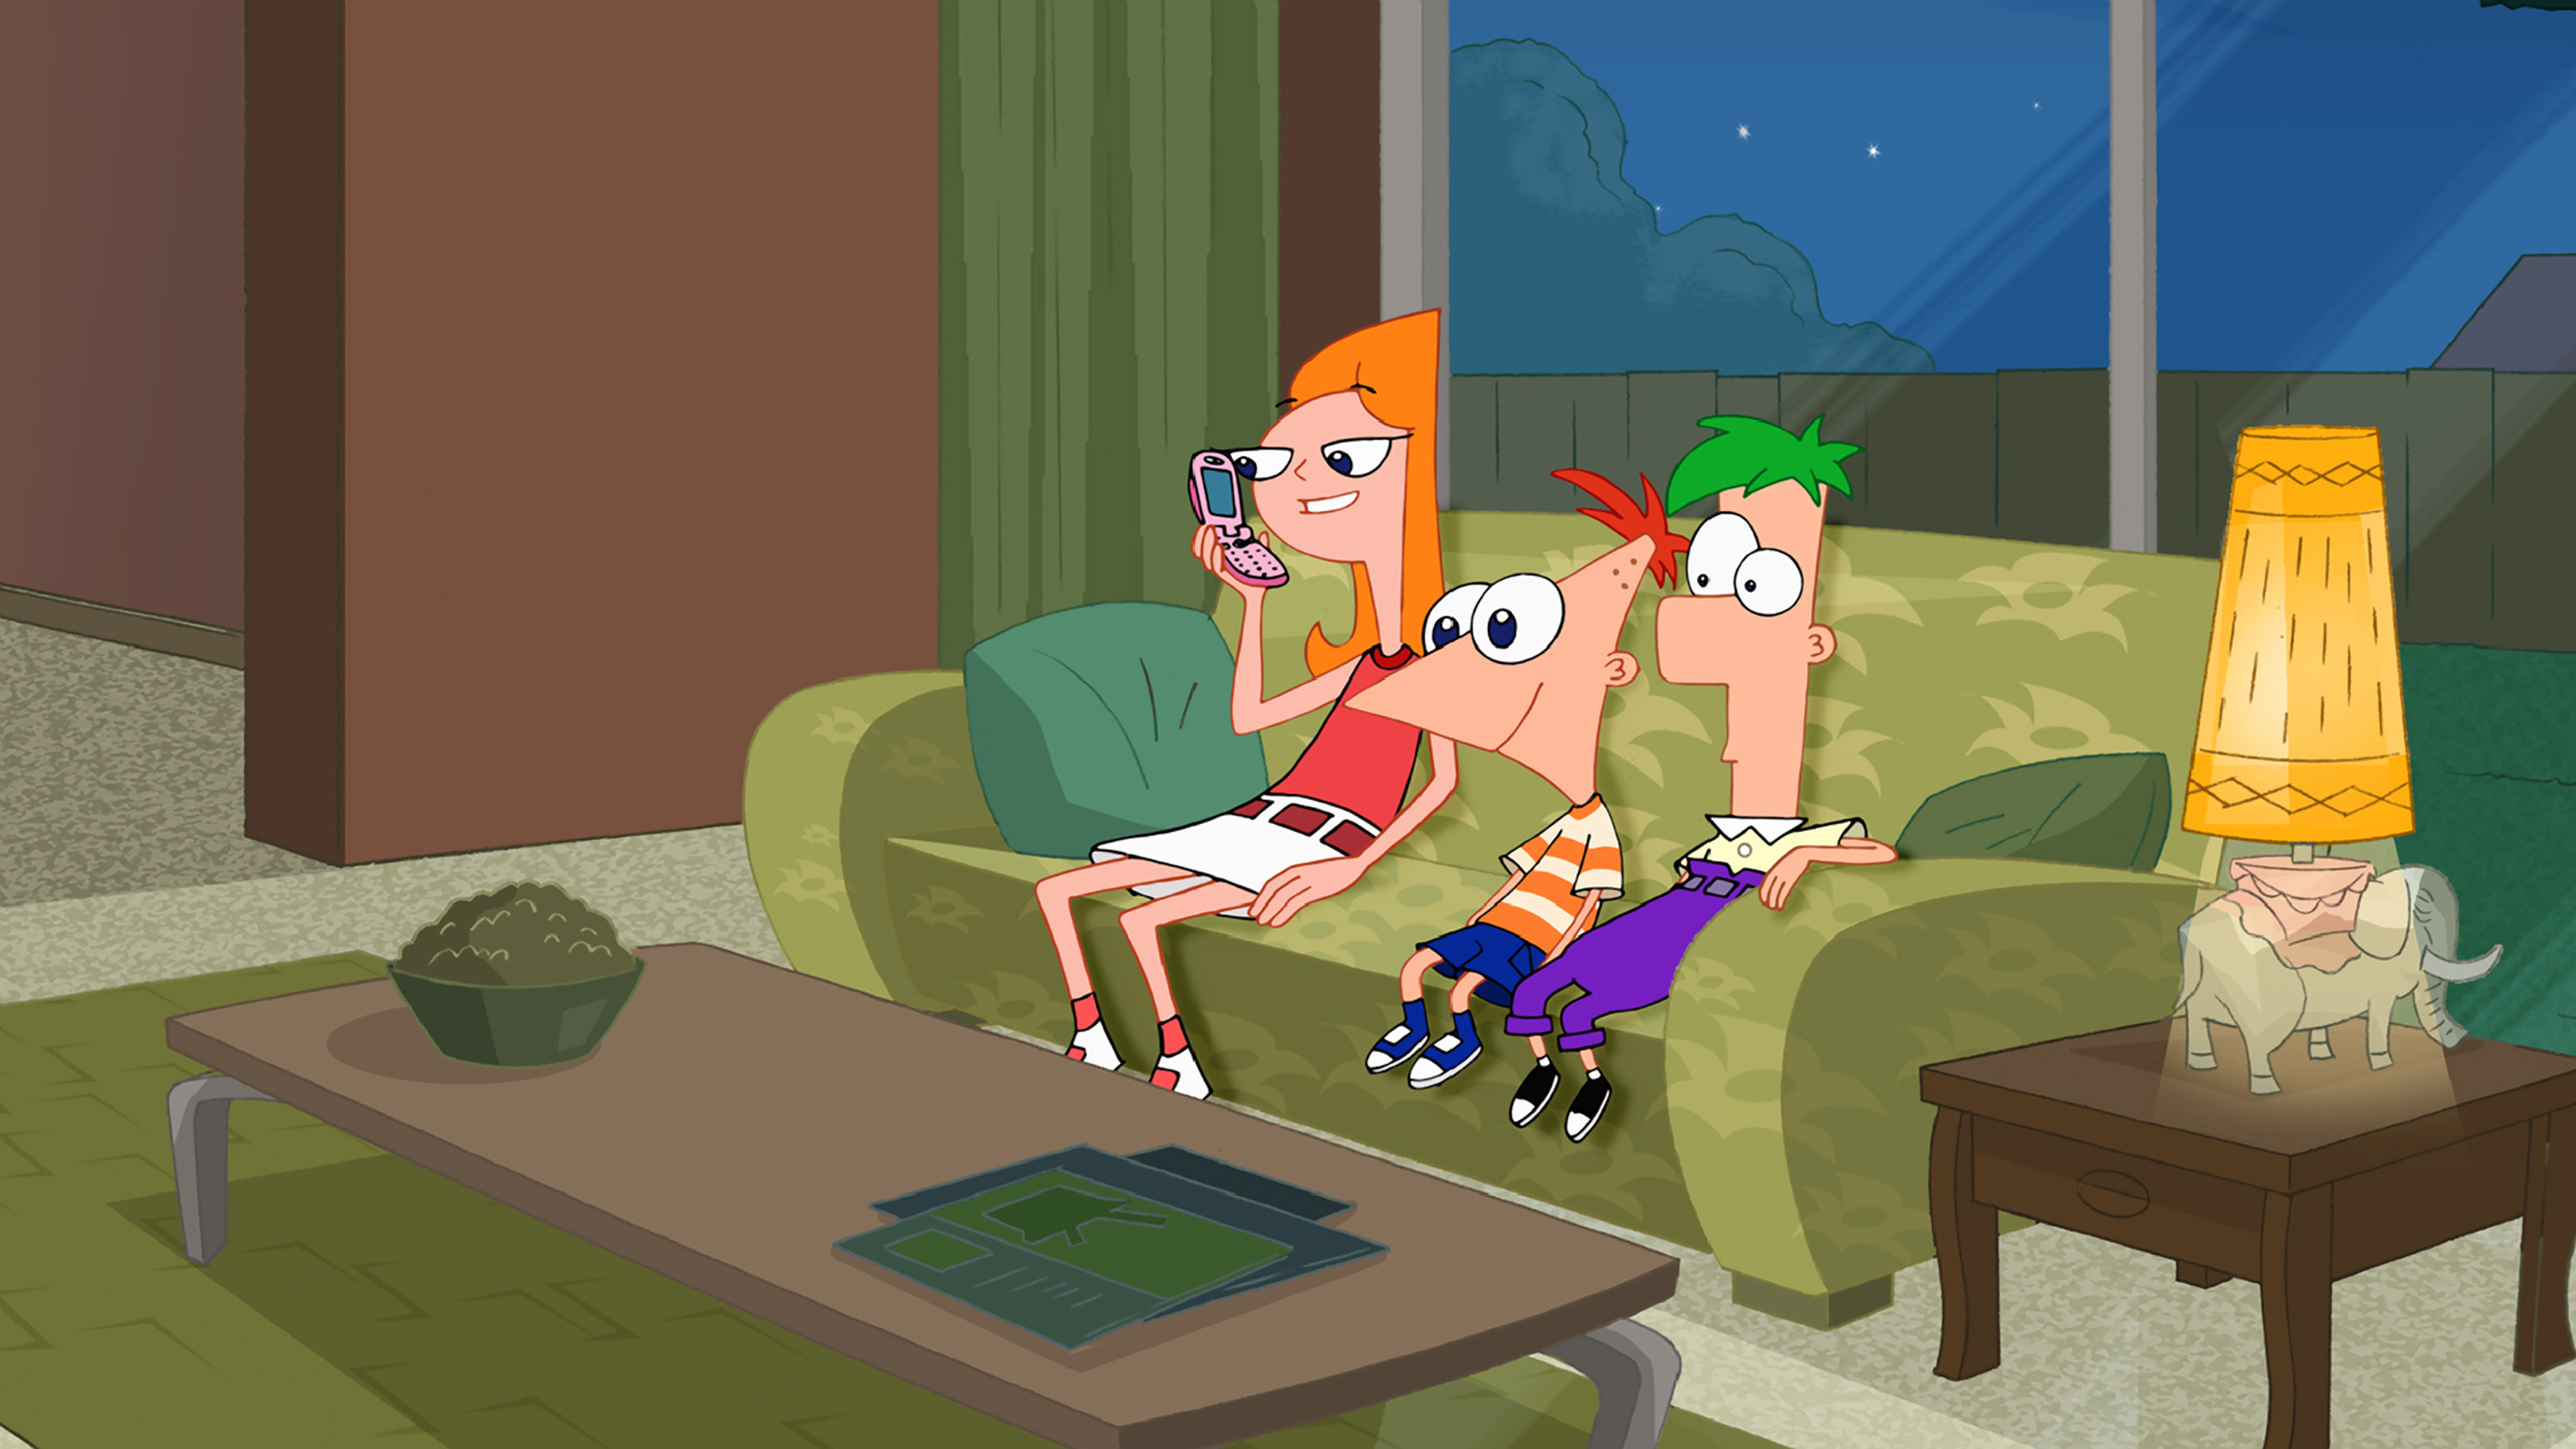 Candace, Phineas, and Ferb sit on the couch